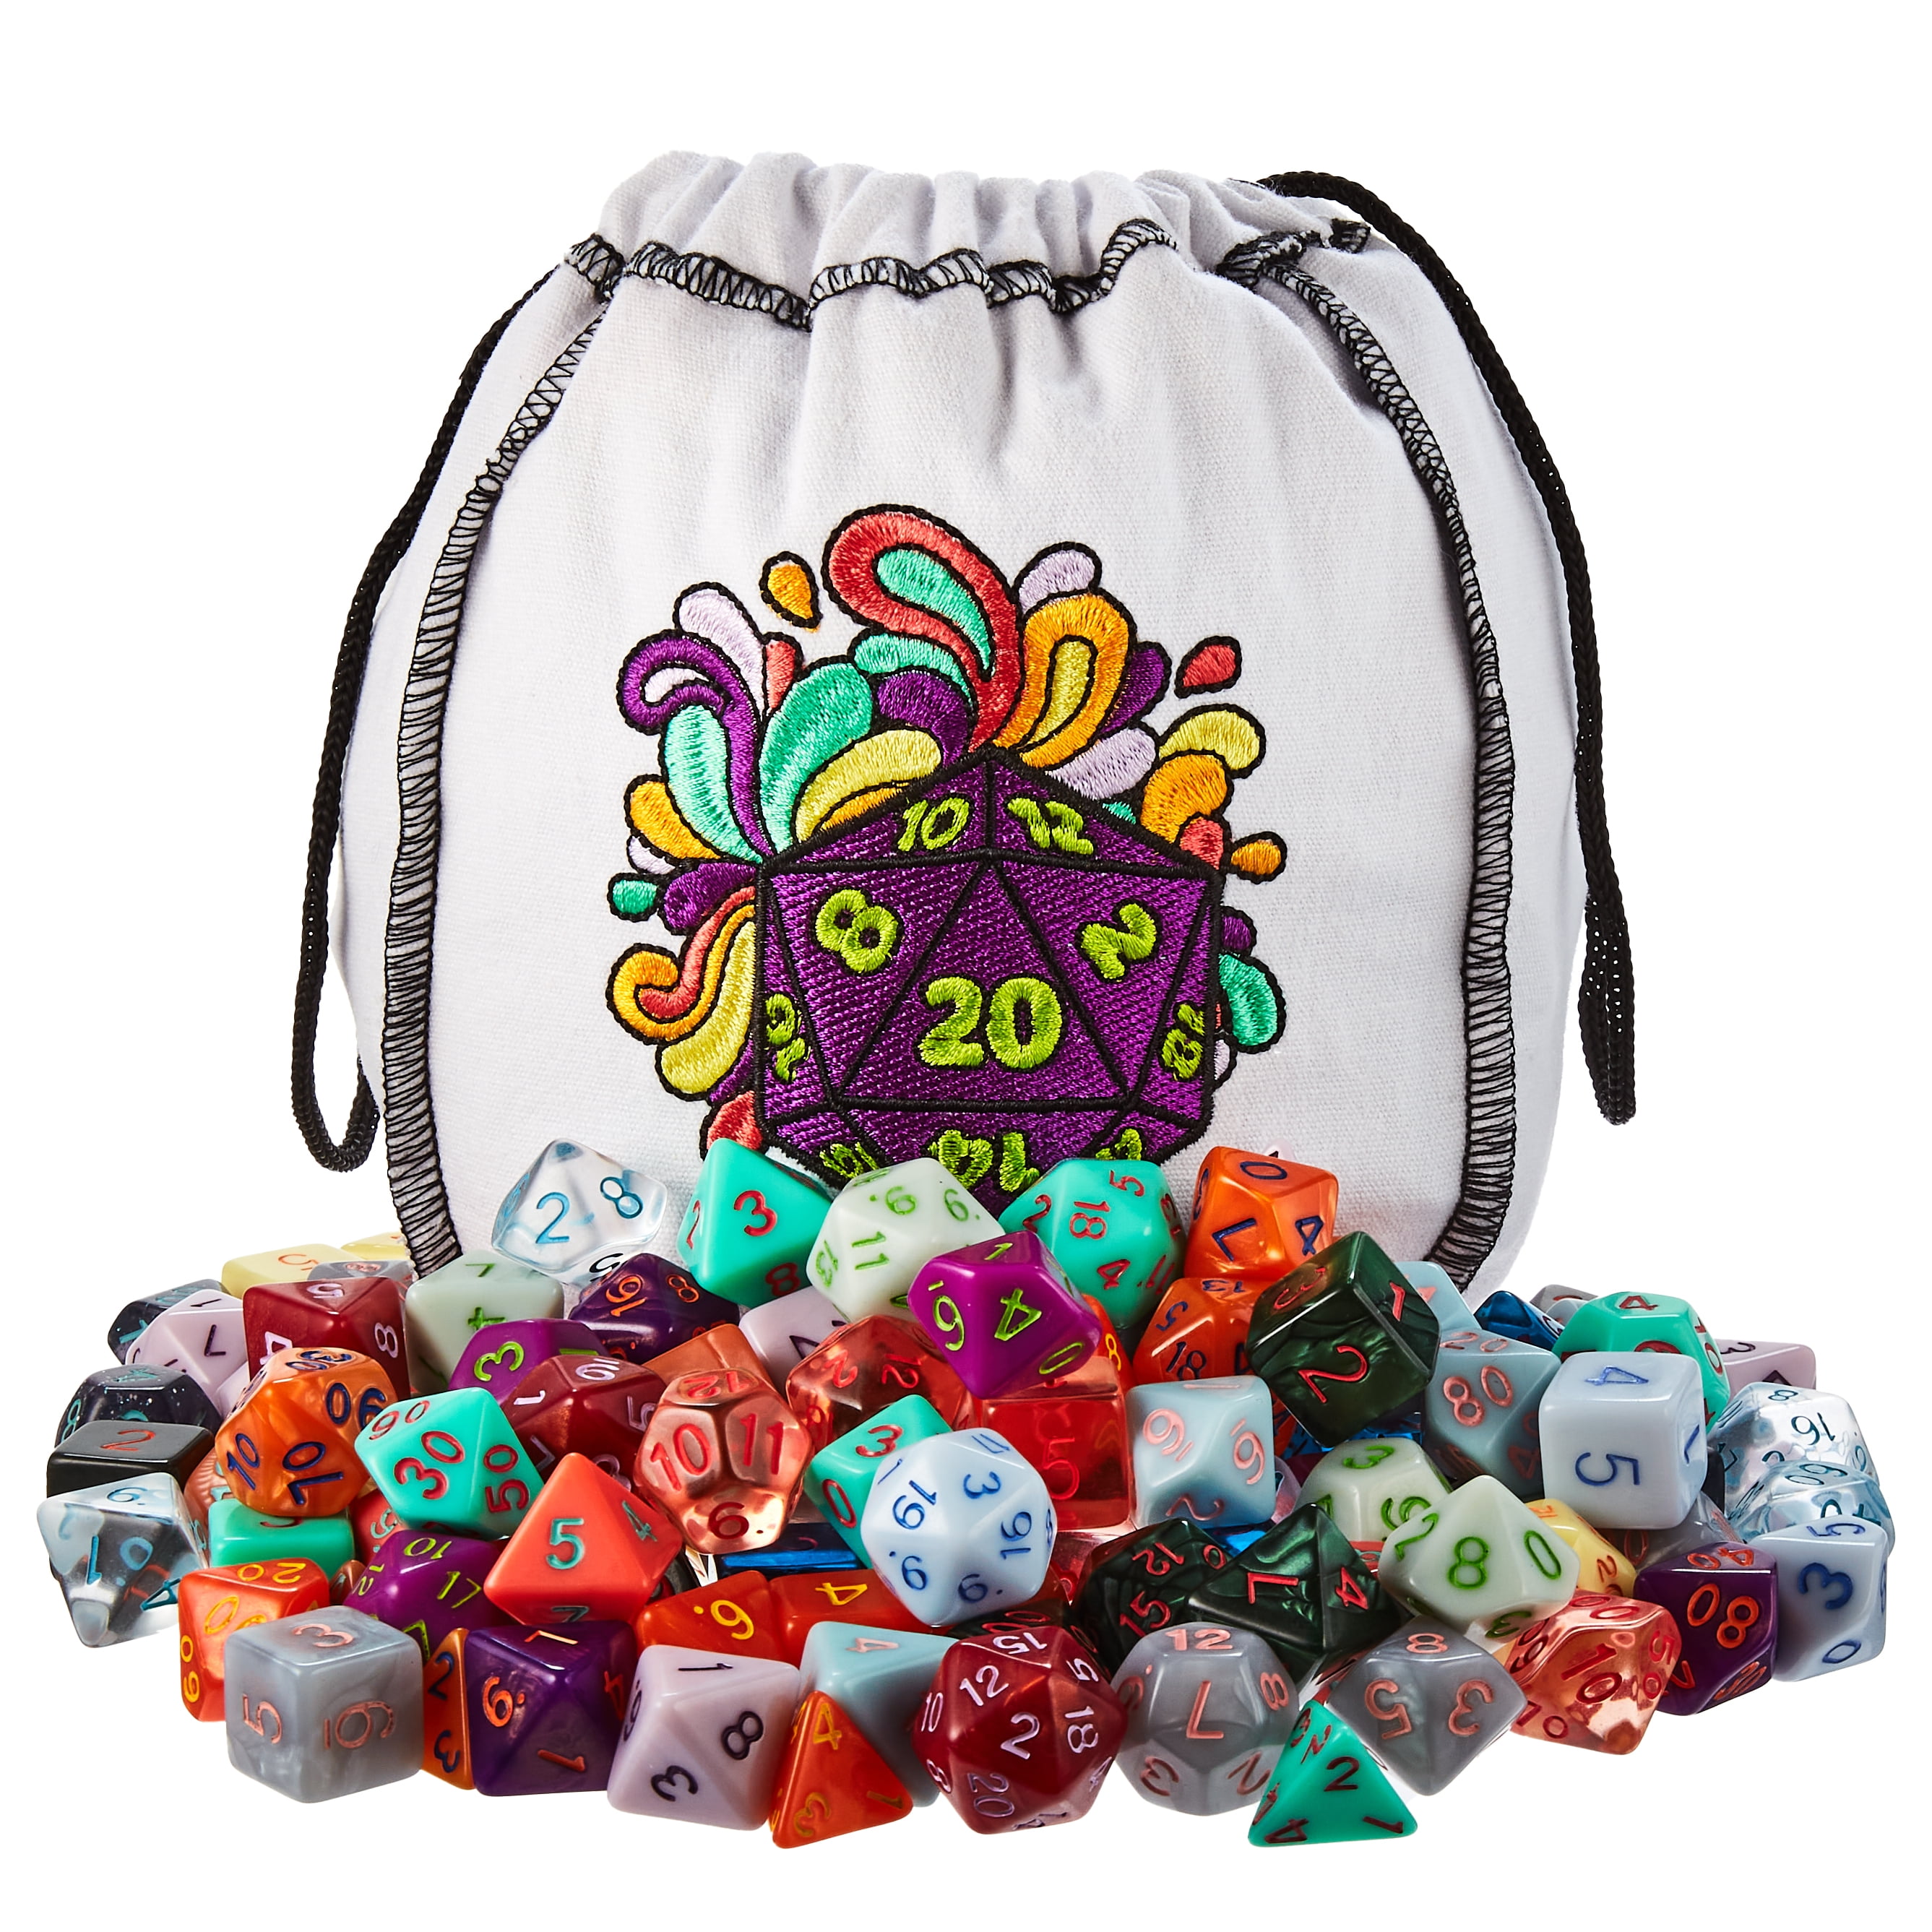 Wiz Dice Bag of Tricks: Collection of 140 Polyhedral Dice in 20 Guaranteed Complete Sets for Tabletop Role-playing Games Translucents Neons & Sparkly Glitters 